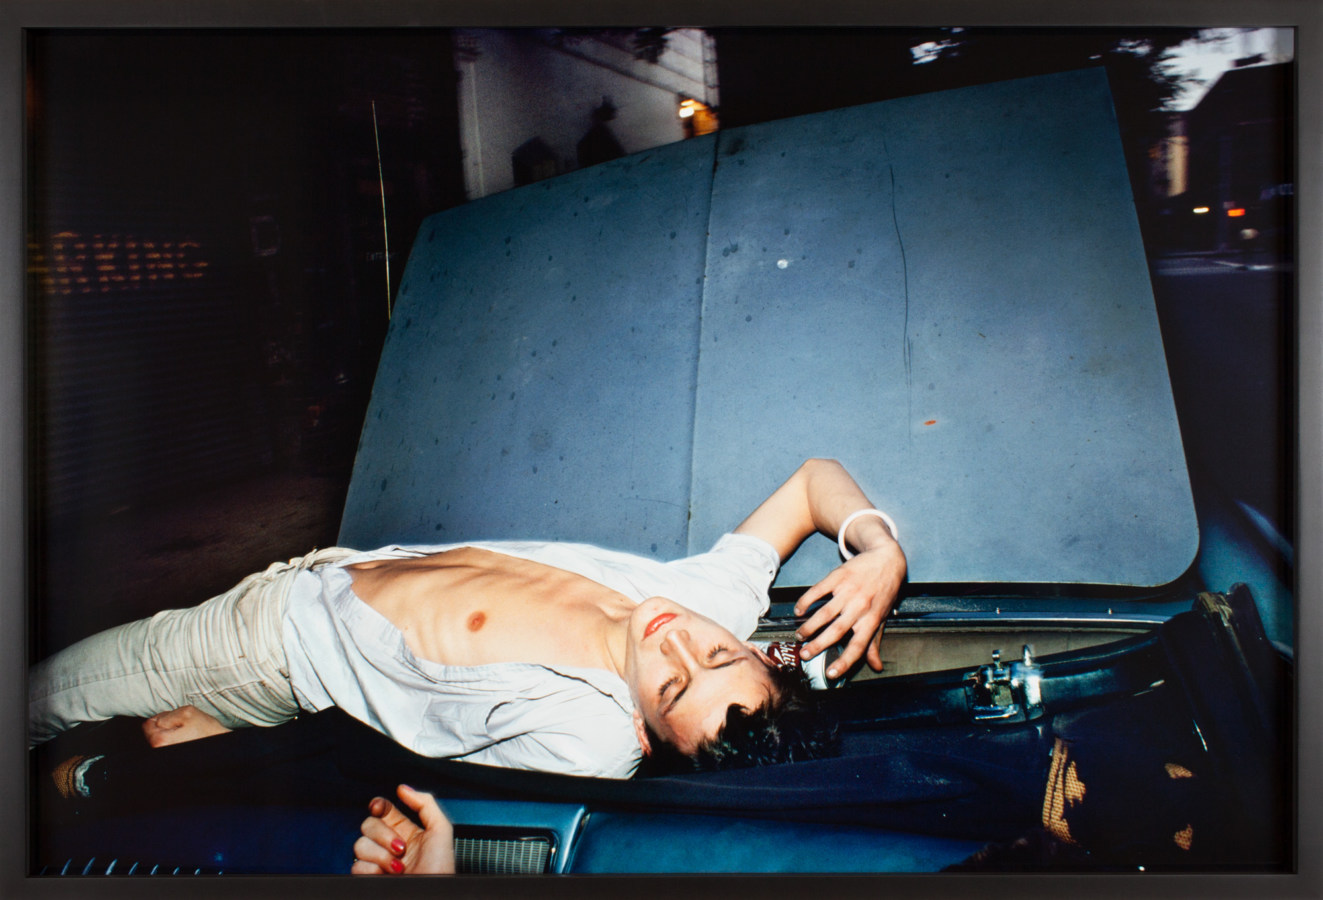 Color photograph of a young man with an open white shirt lying on the windshield of a blue car